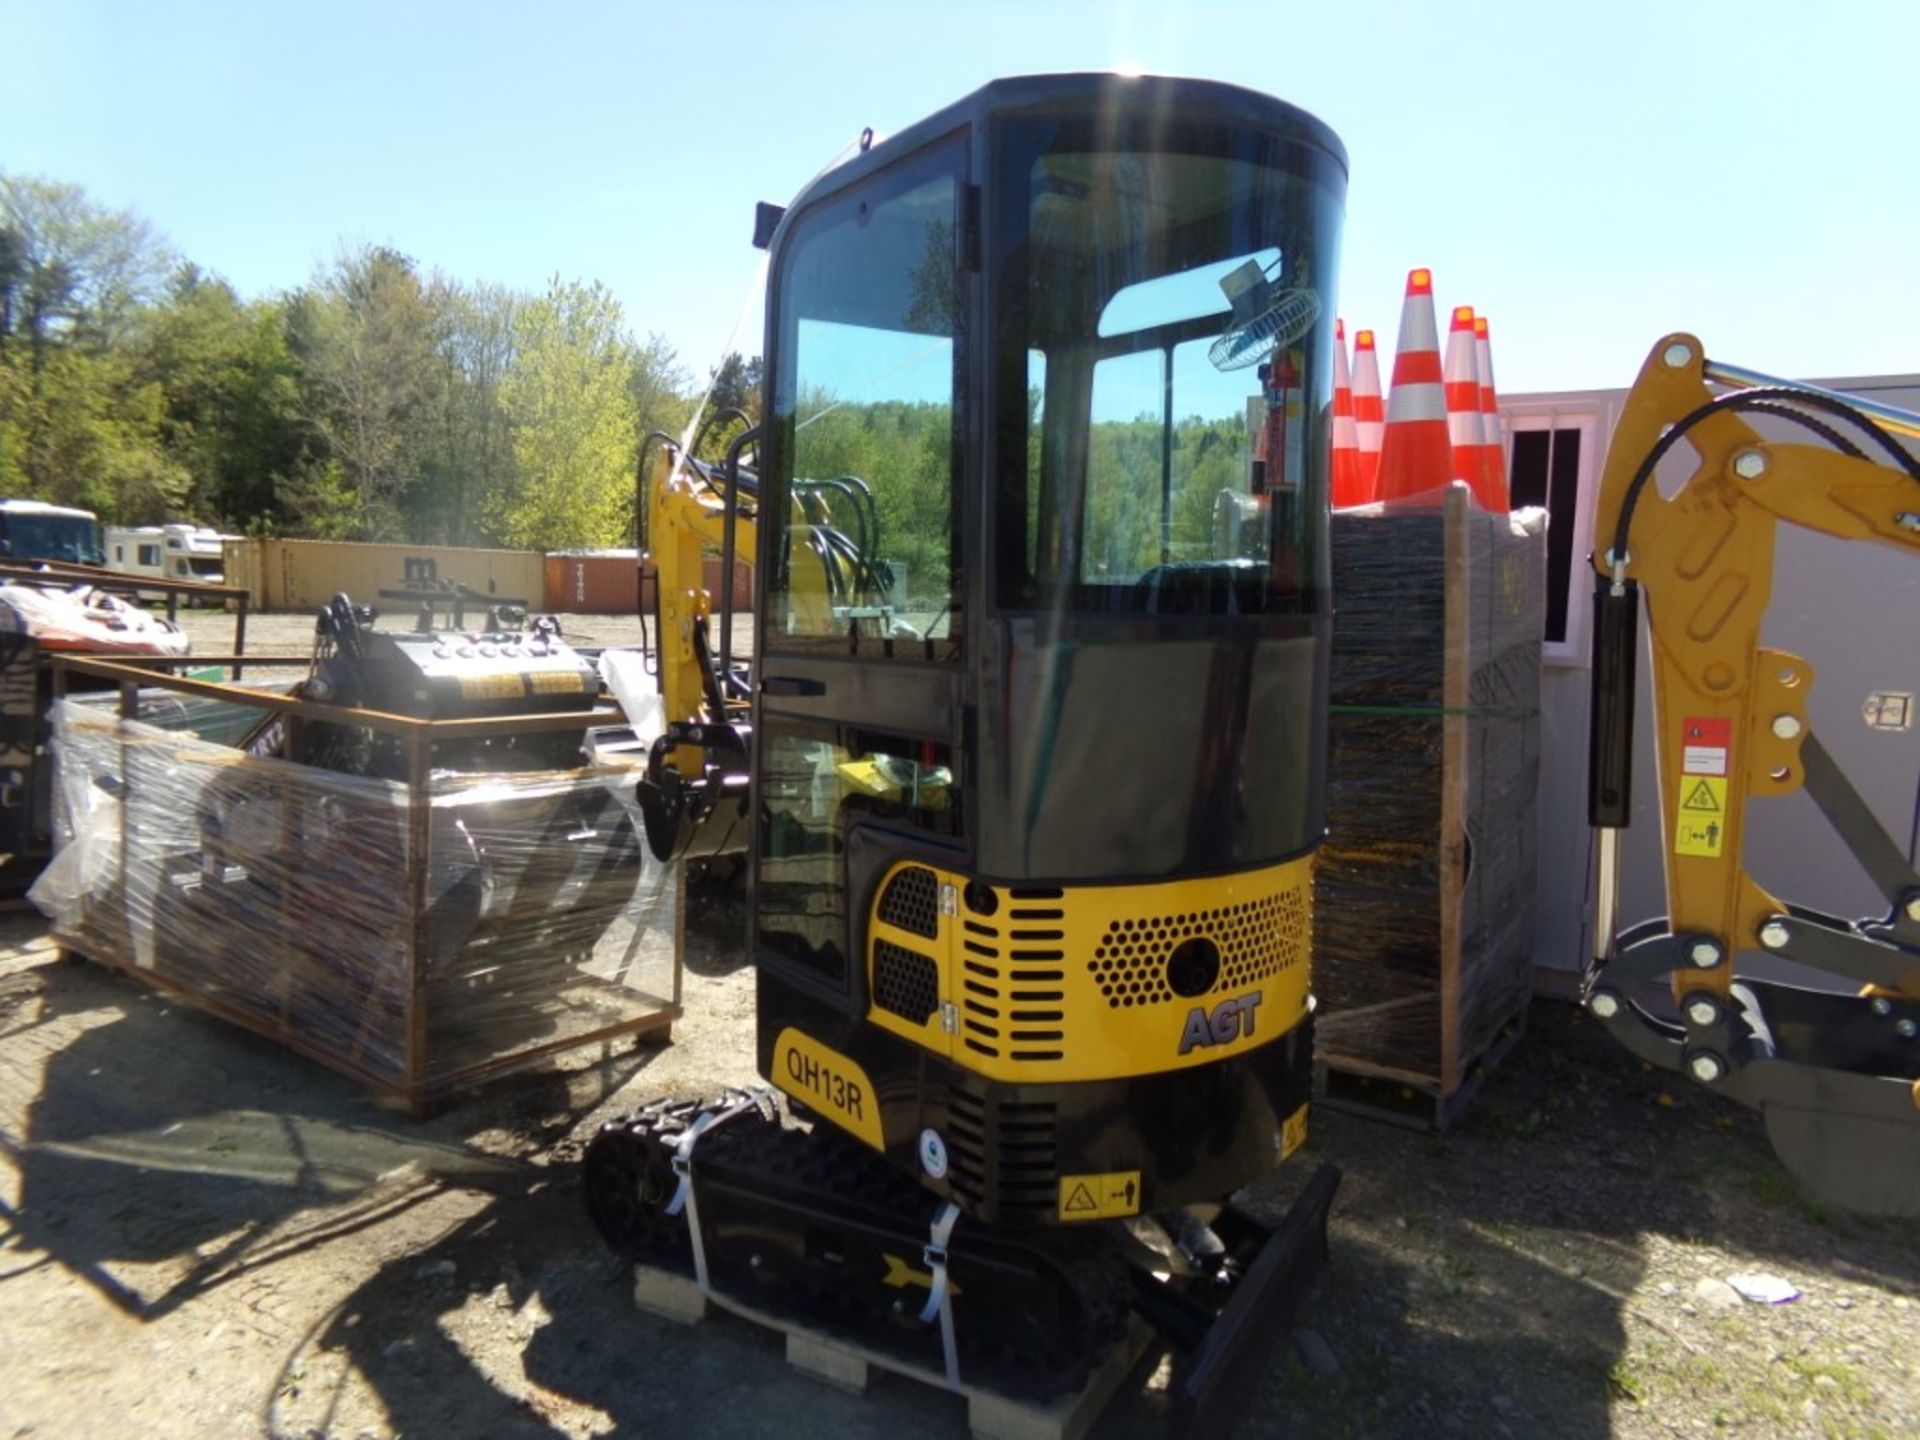 New AGT Industrial QH13R Mini Excavator with Full Cab, Stationary Thumb, Grader Blade, Yellow - Image 2 of 5